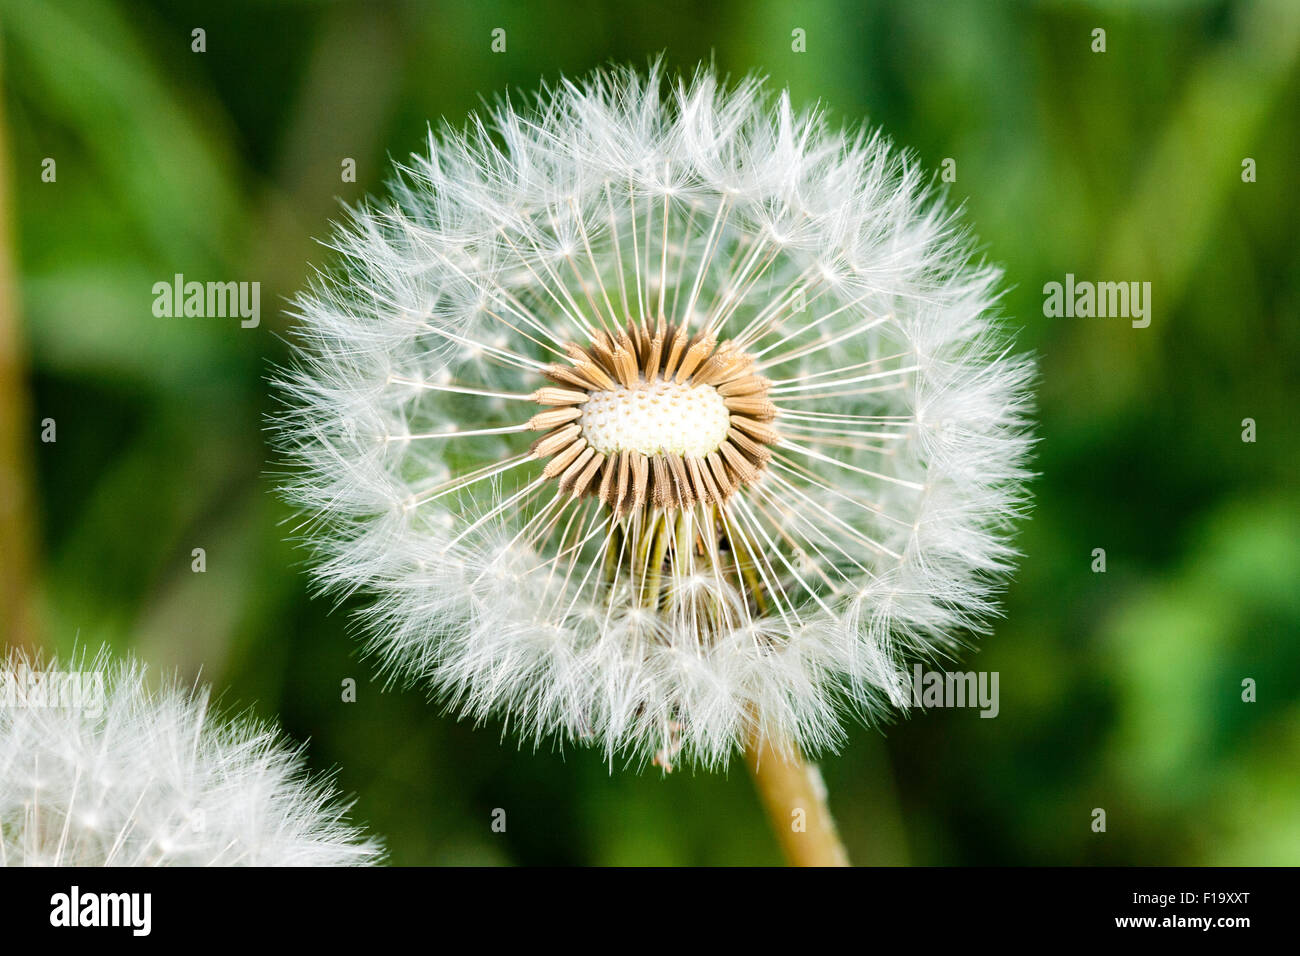 Dandelion 'Taraxacum agg', flower head turned into seed-head with round pattern of white seeds, in spray from flower head. Macro close up. Stock Photo